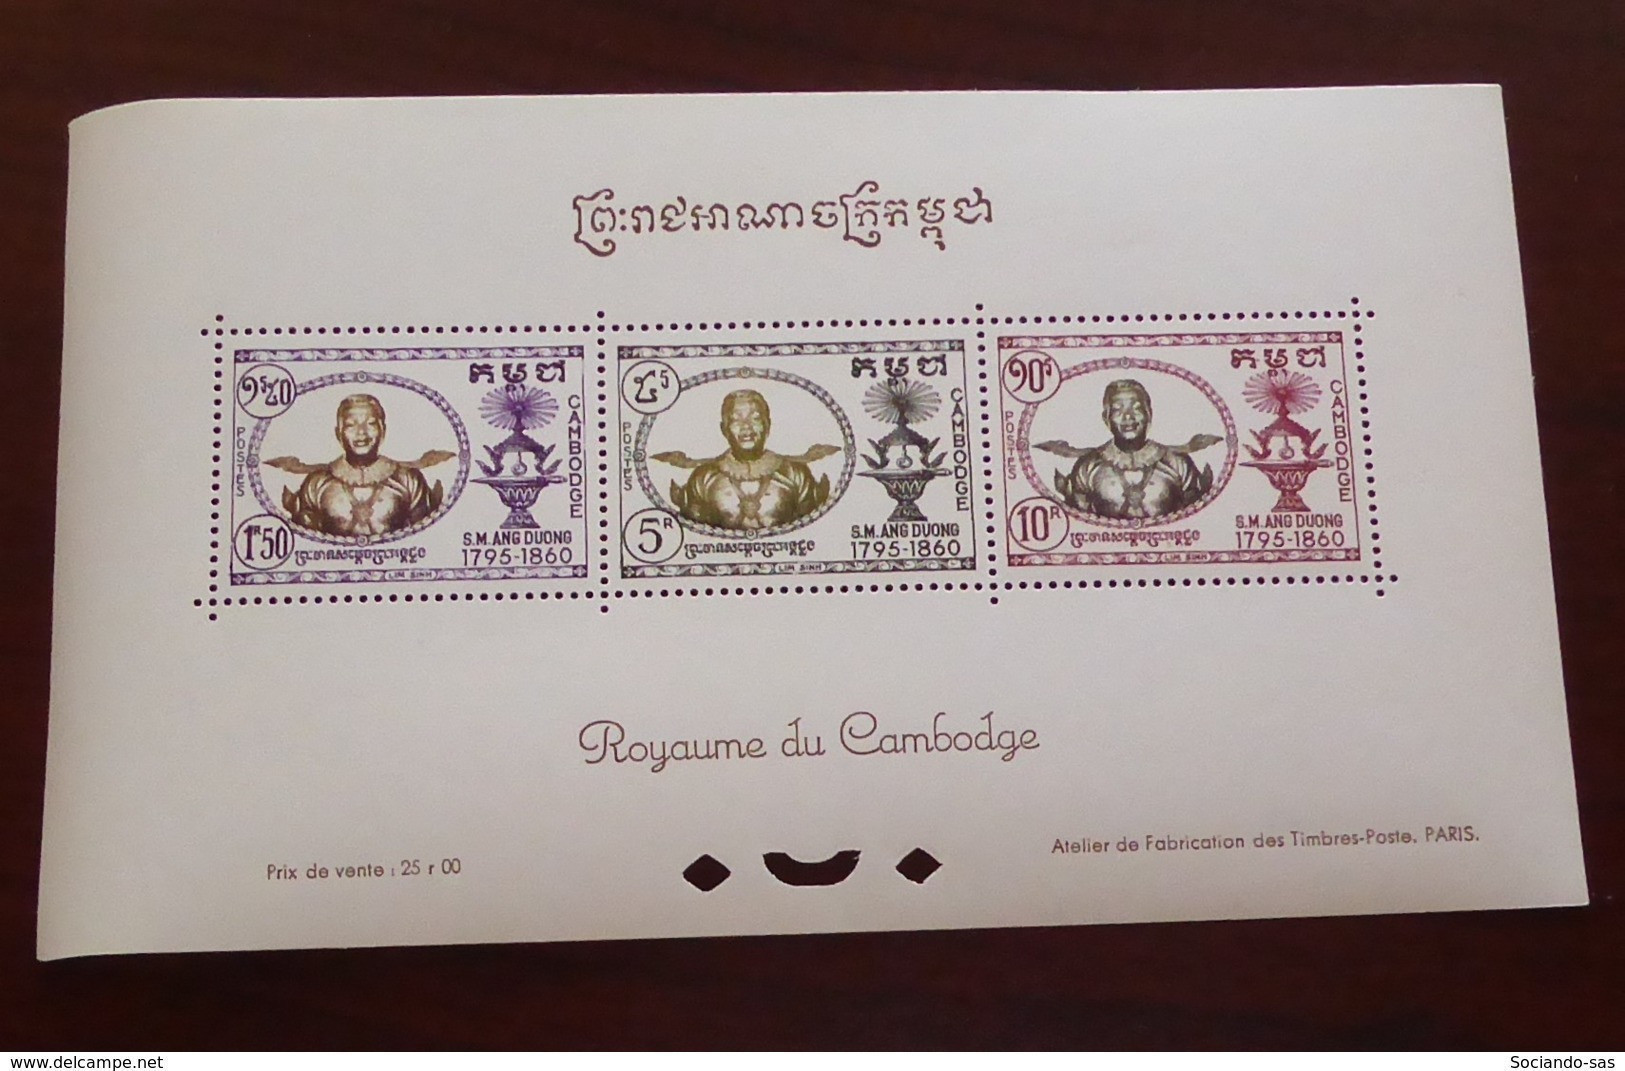 CAMBODGE - 1958 - Bloc Feuillet BF N°YT. 12 - Roi Ang-Duong - Neuf Luxe ** / MNH / Postfrisch - Cambodja